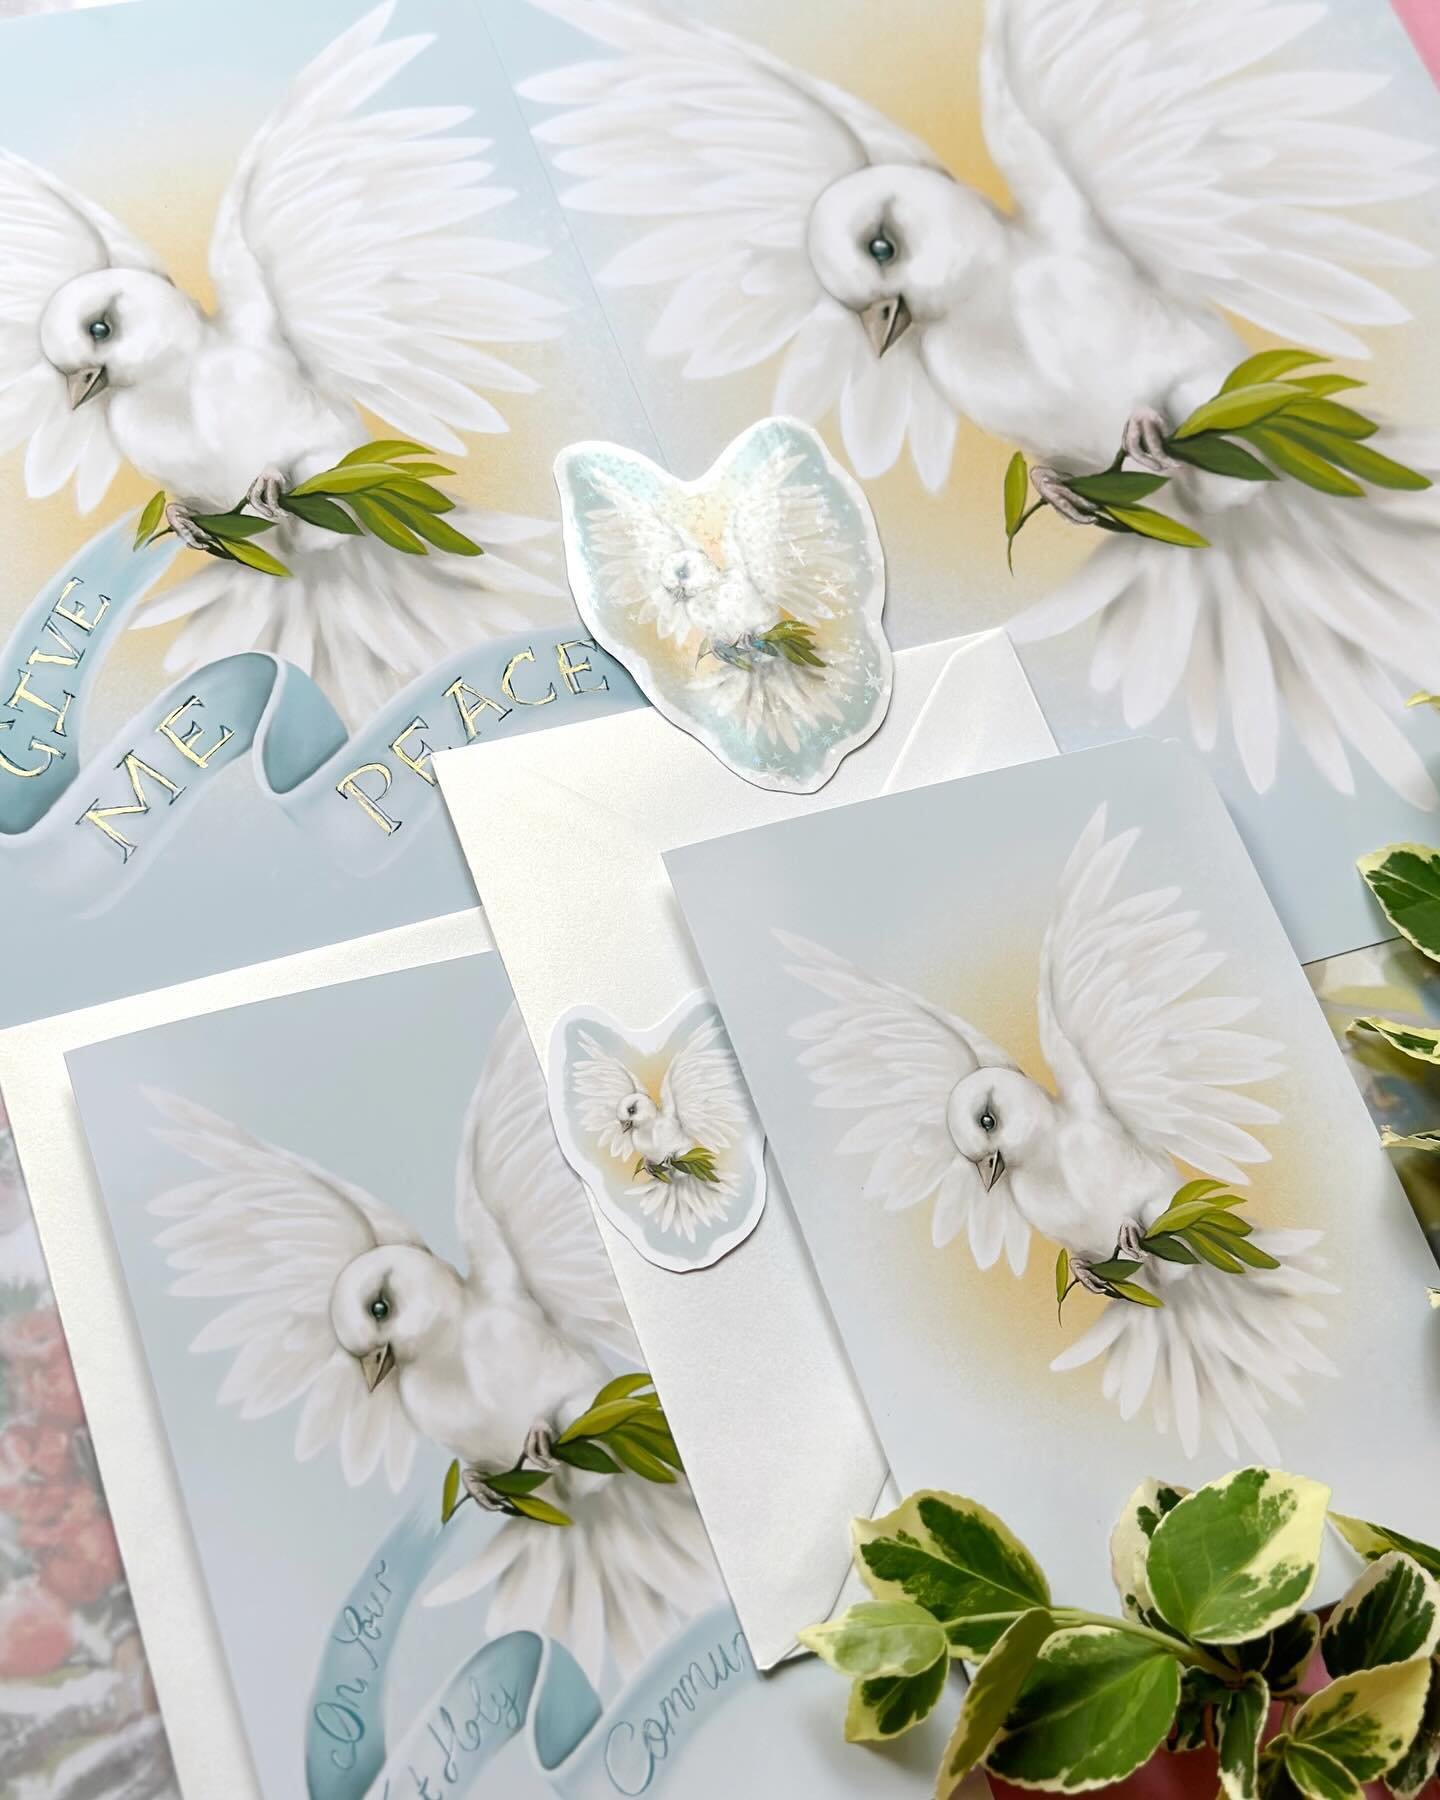 🩵🍃Hello my little doves 🕊️🩵
🌿 The Olive Dove!🕊️ 
Customisable cards, prints and stickers! ✨ isn&rsquo;t this just exciting.
Perfect for sending joy and love, or for holy communion, baby showers, anything! 
Message me for now until it&rsquo;s up